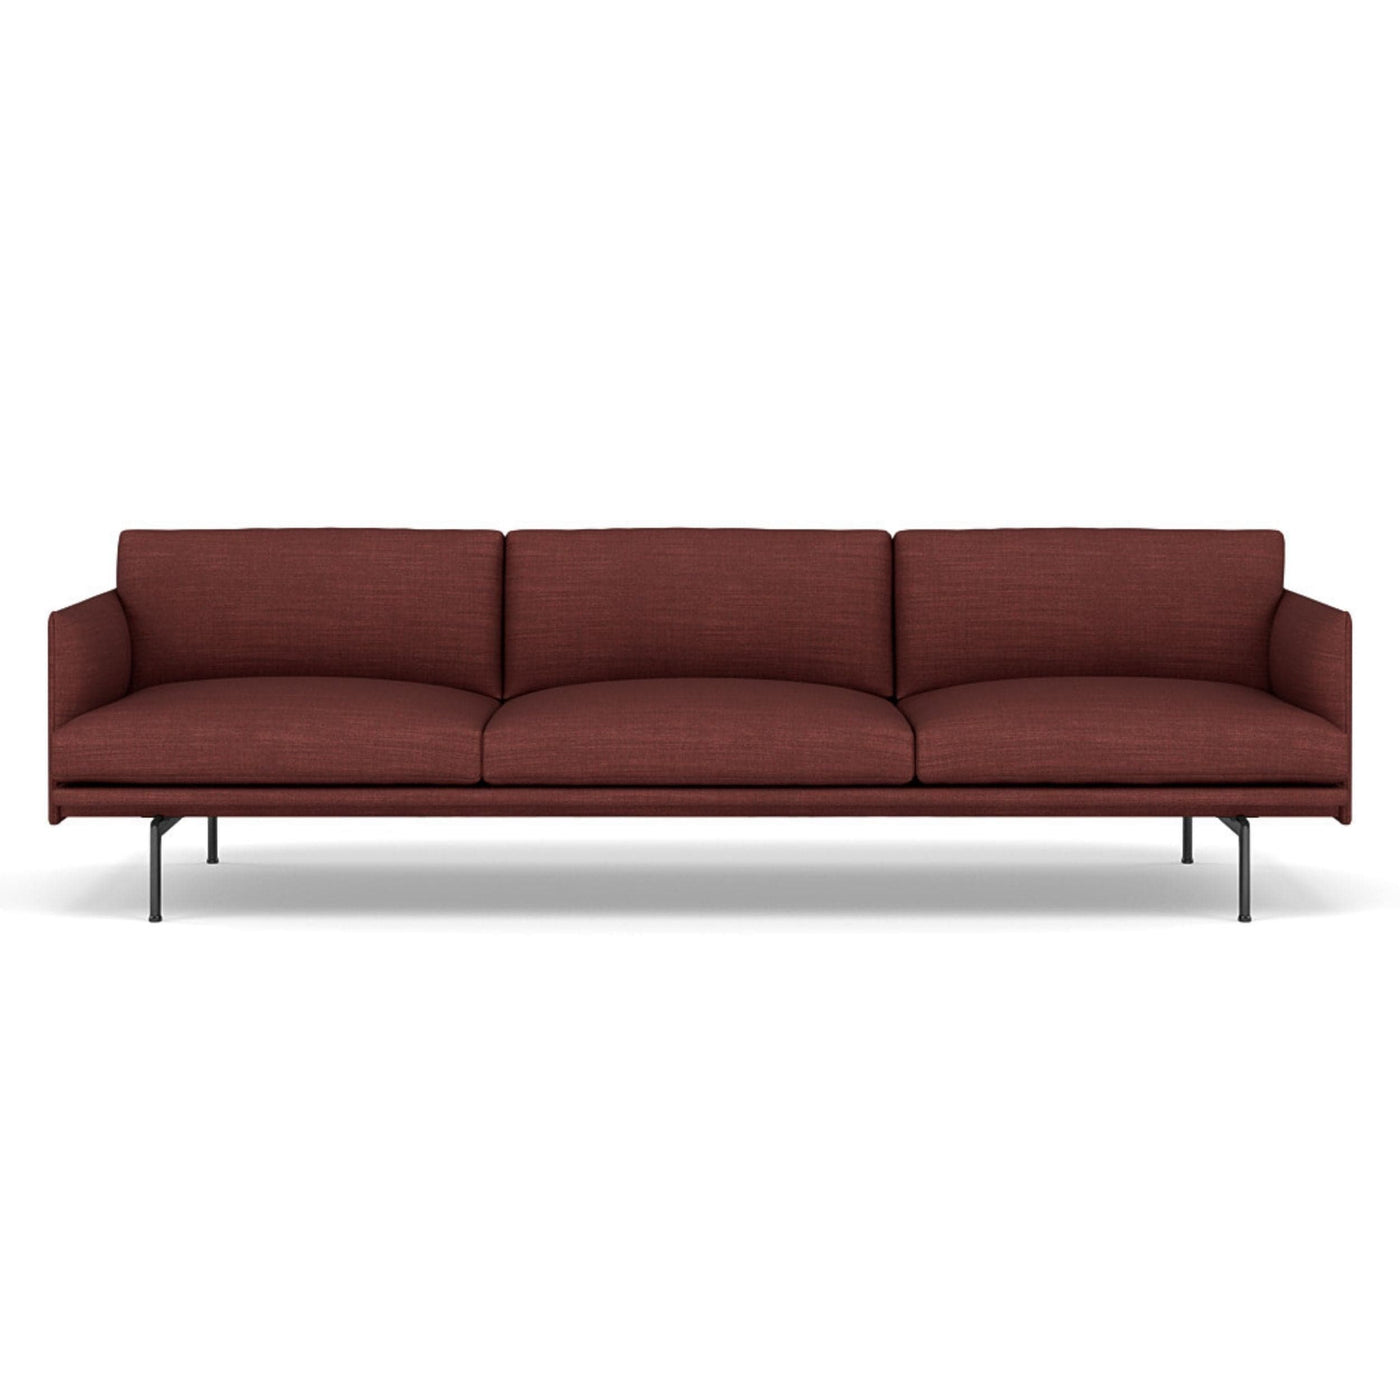 muuto outline 3.5 seater sofa in canvas 576 red and black legs. Made to order from someday designs. #colour_canvas-576-red